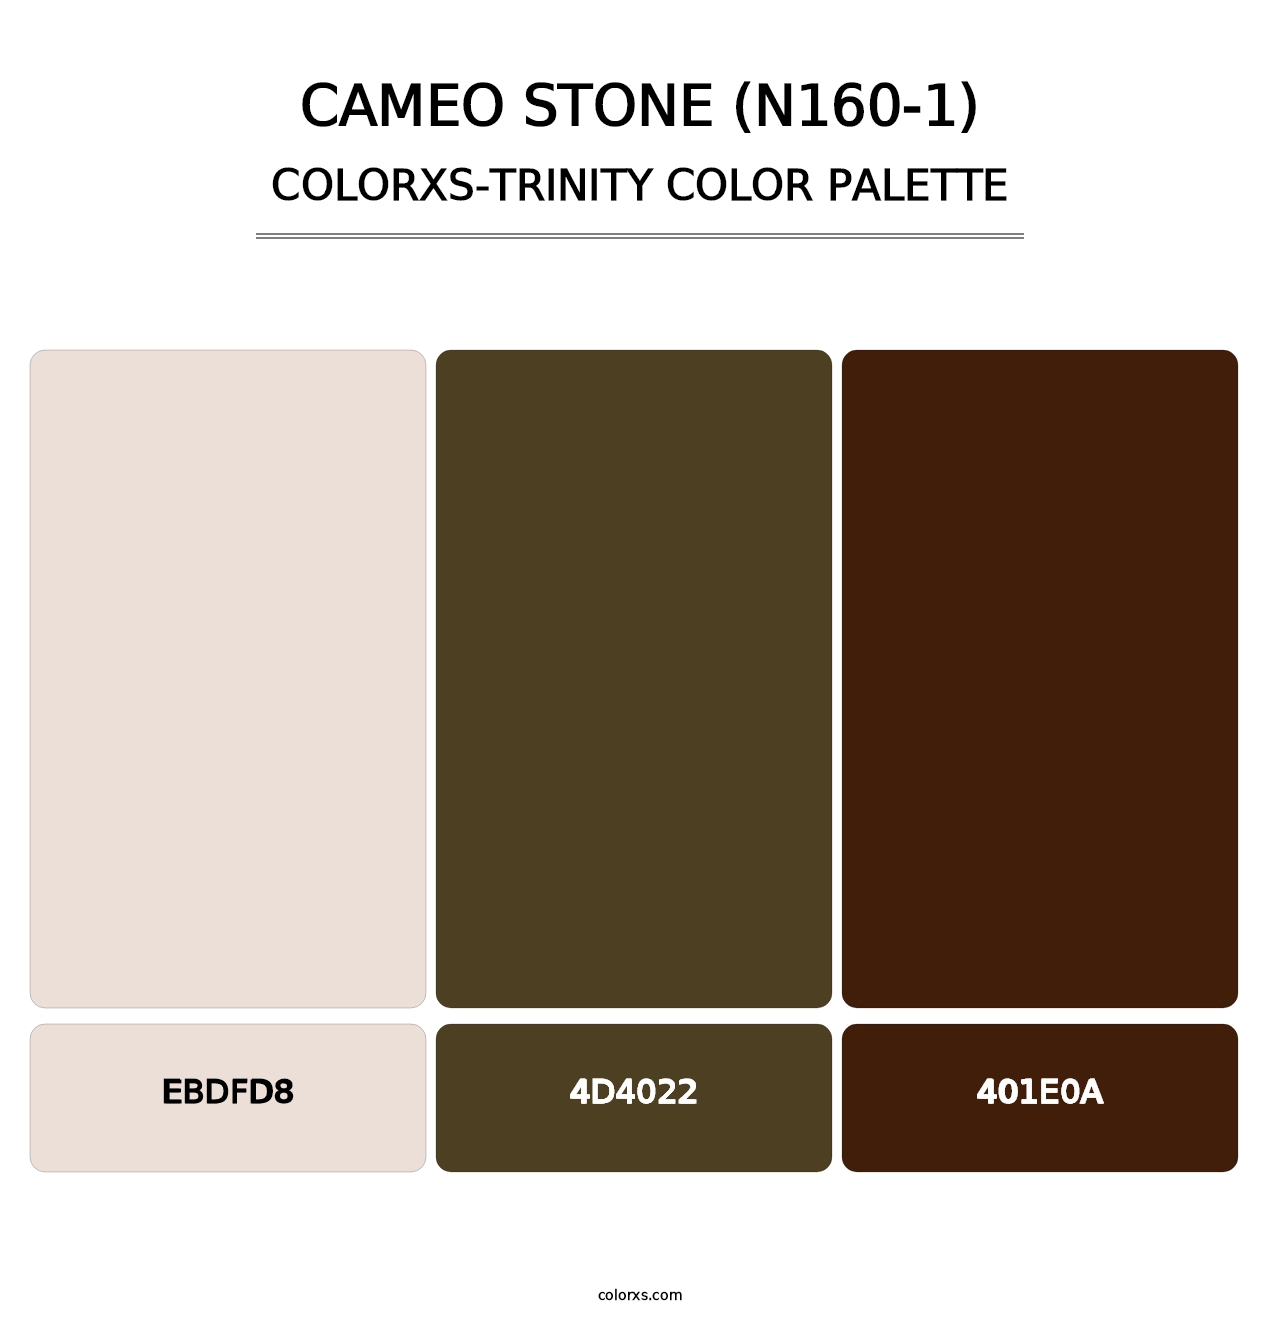 Cameo Stone (N160-1) - Colorxs Trinity Palette